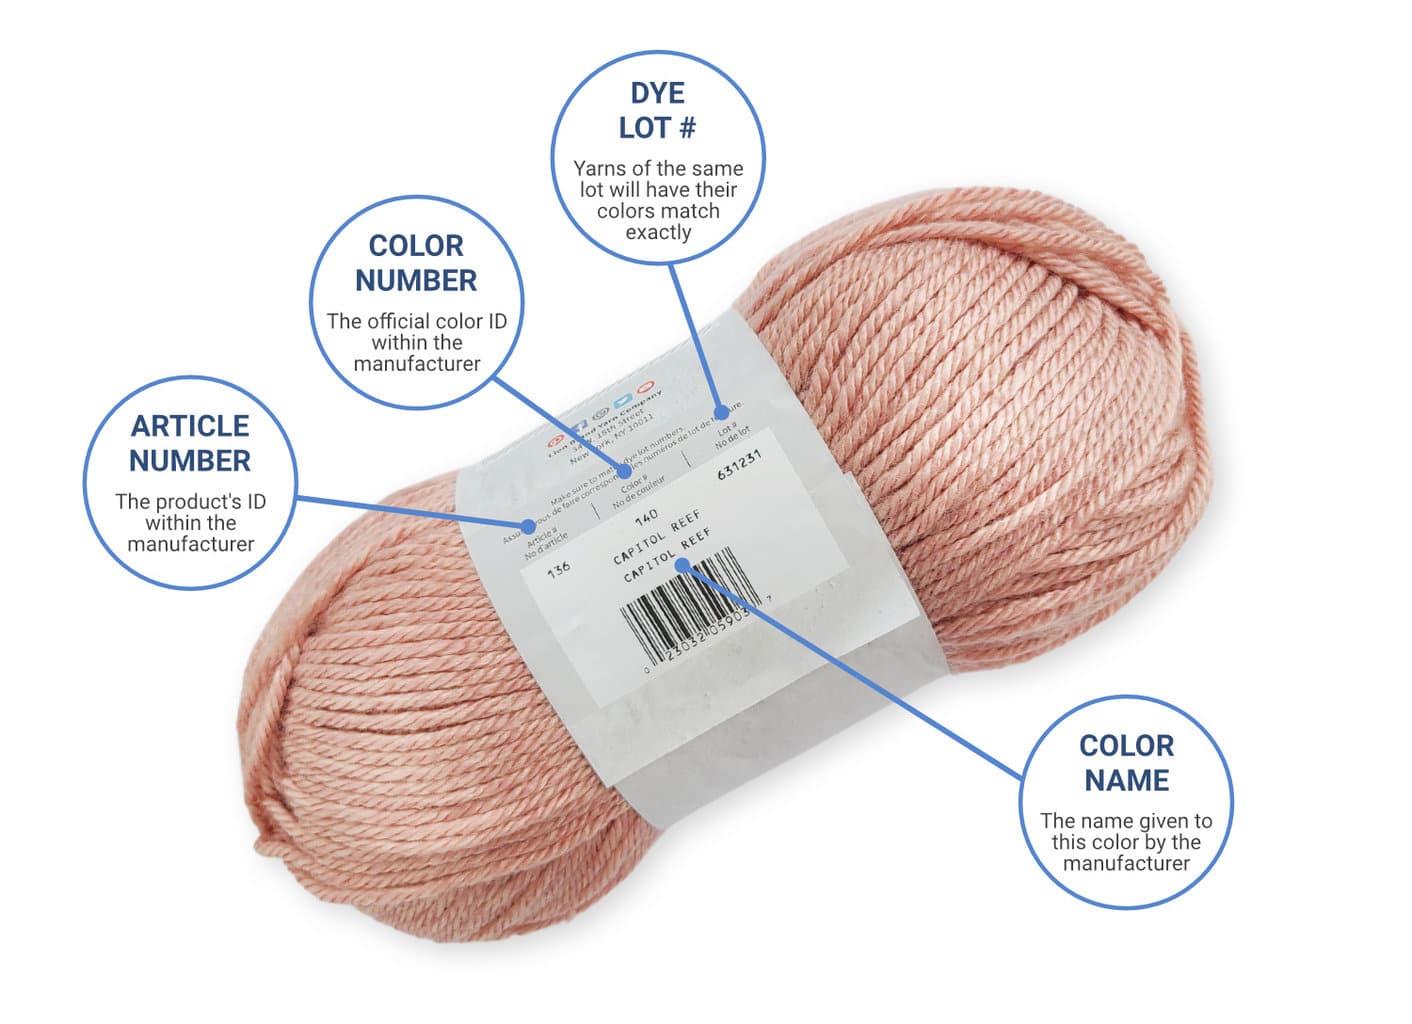 How to Read a Yarn Label